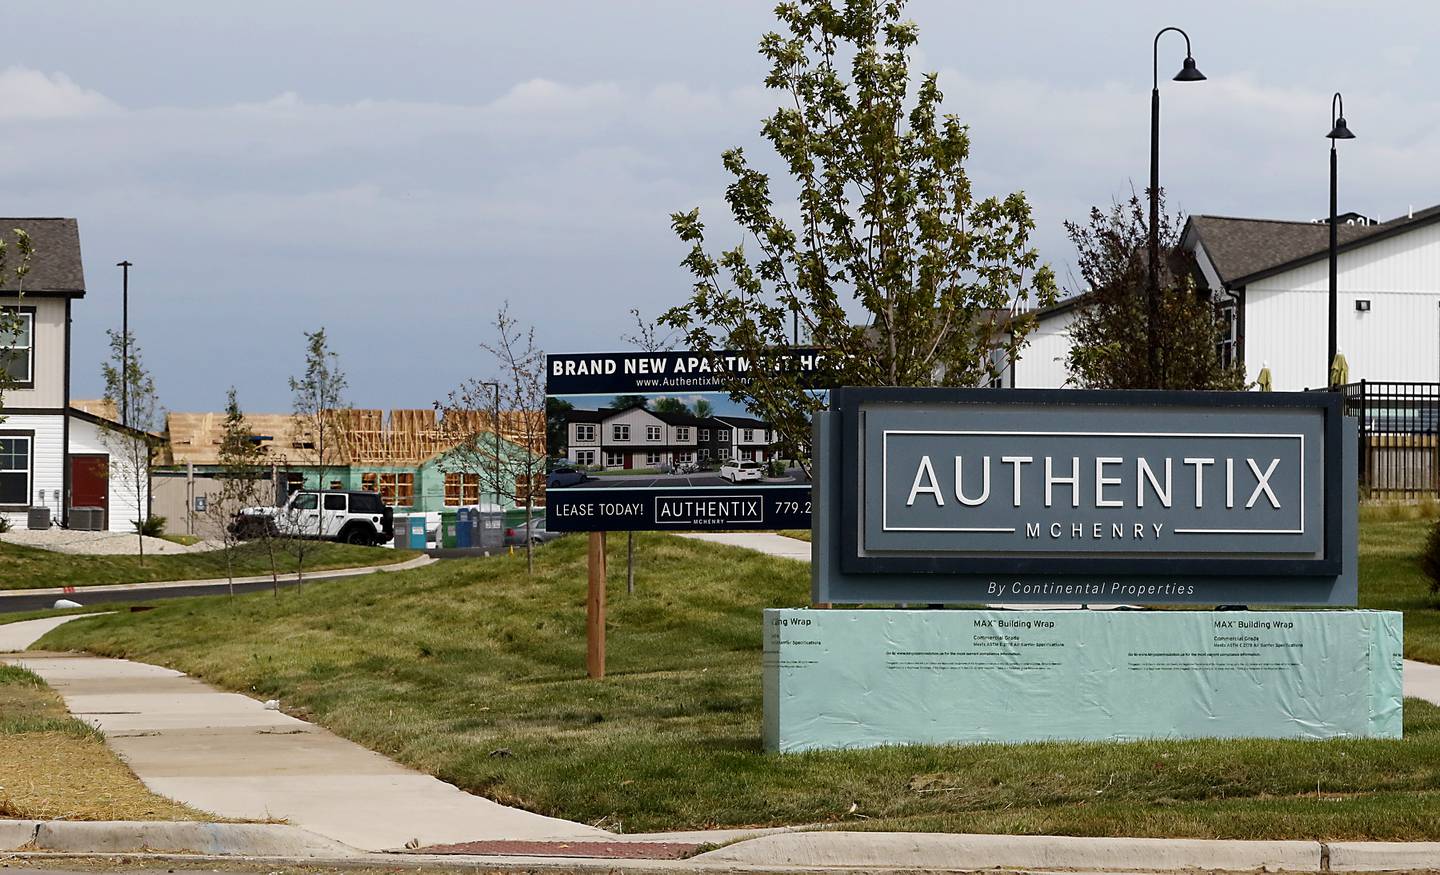 Work continues on Continental Properties' 288 unit Authentix McHenry apartment community at 3415 Blake Road, in McHenry, on Wednesday, August 3, 2022. their newest apartment community.